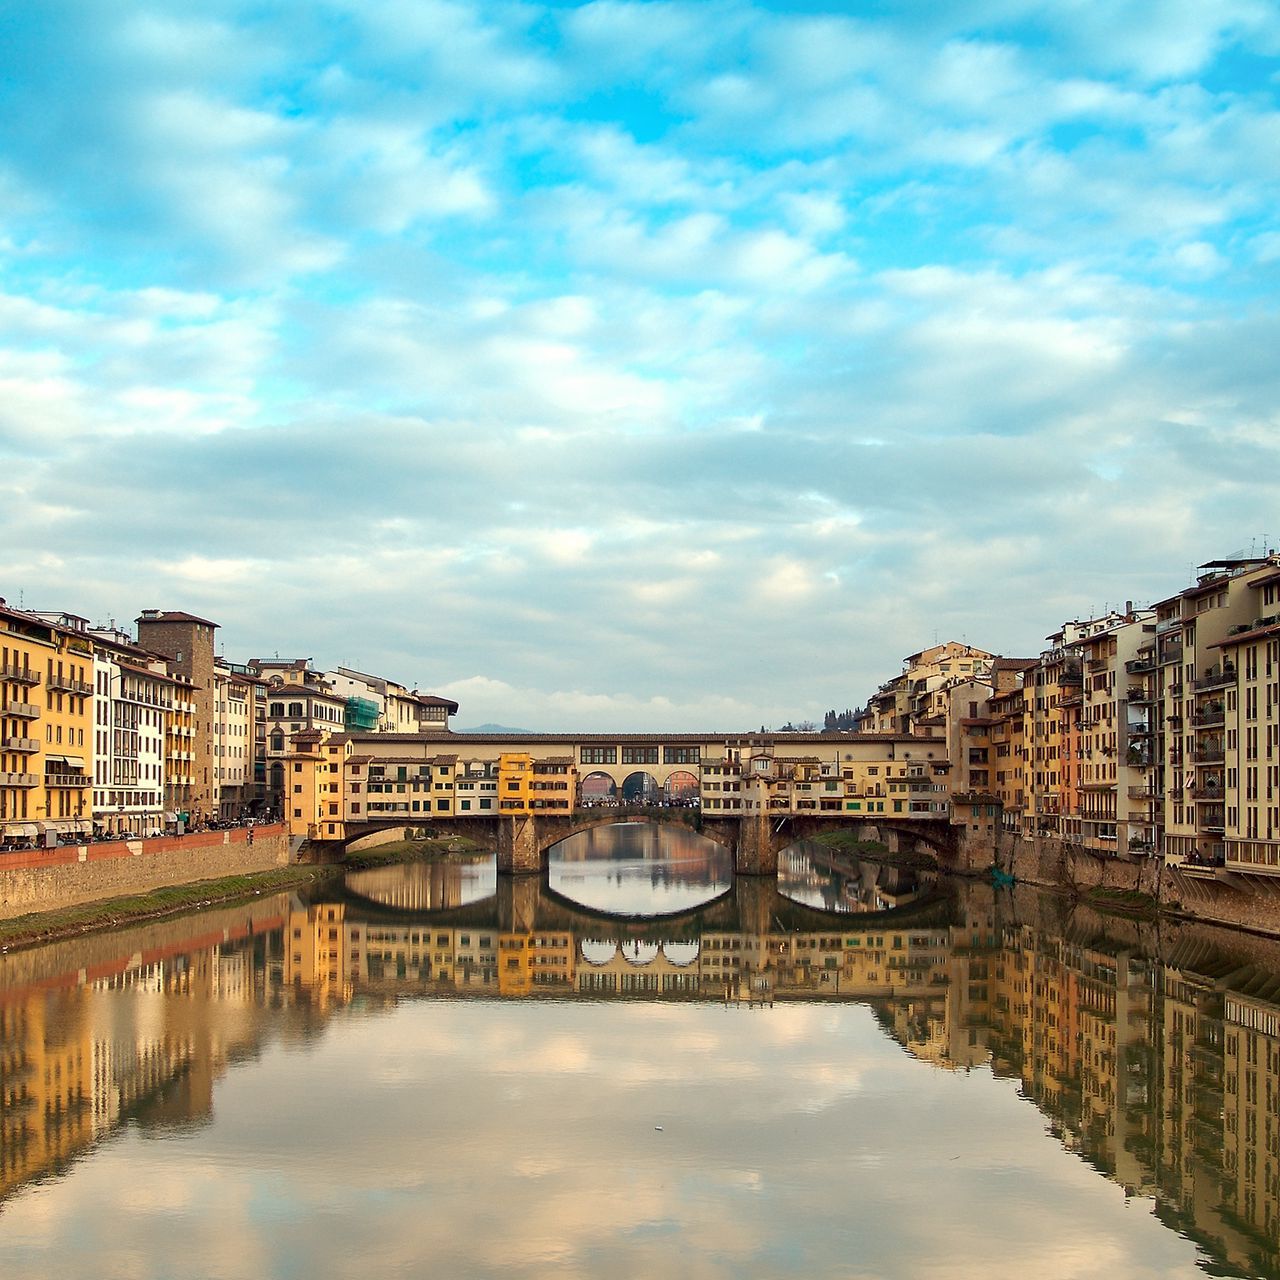 Download wallpaper 1280x1280 ponte vecchio, new years eve, florence, italy ipad, ipad ipad mini for parallax HD background